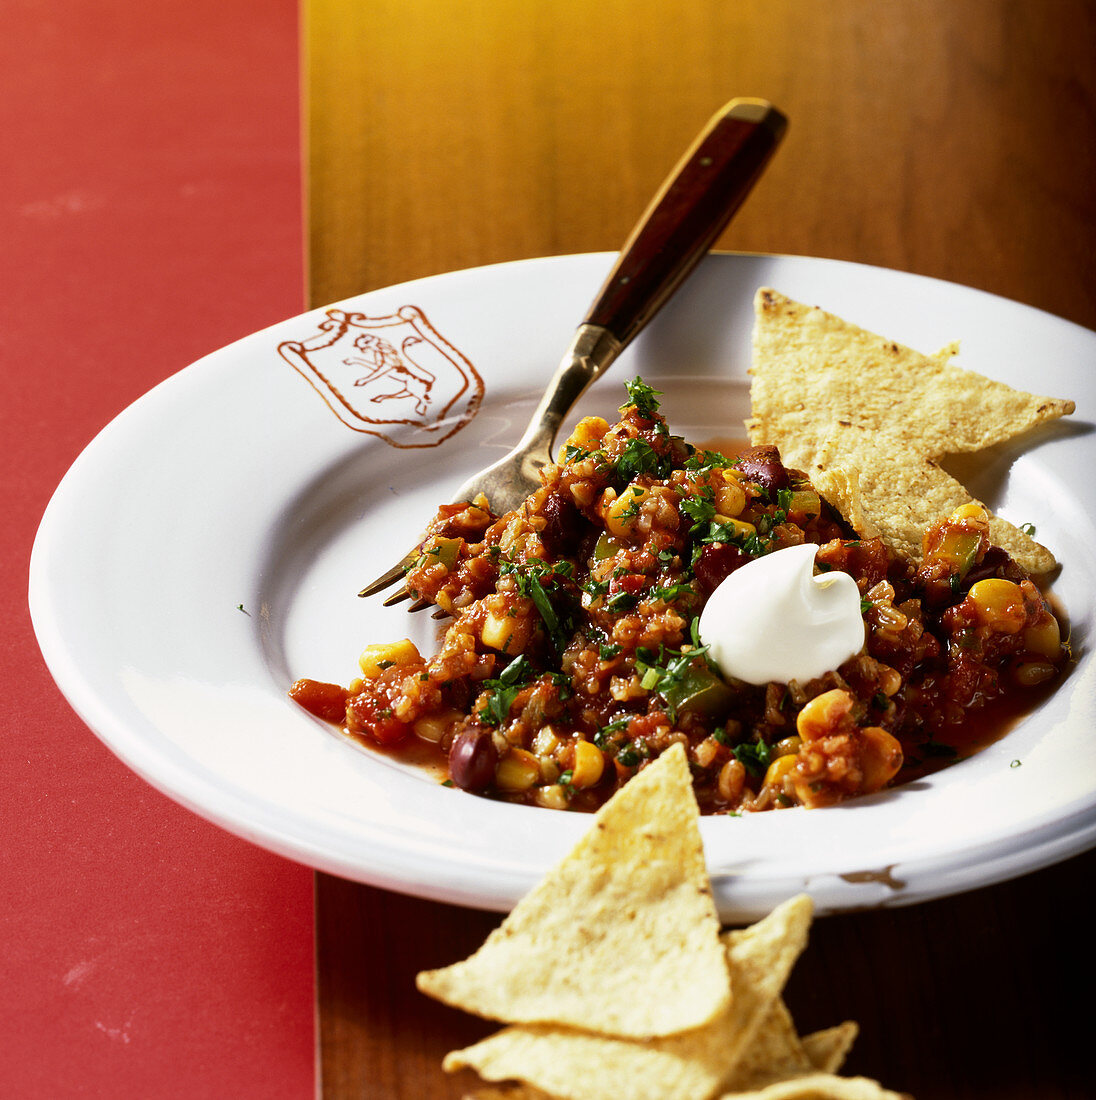 Vegetarian chili con carne made with green corn and tortilla chips